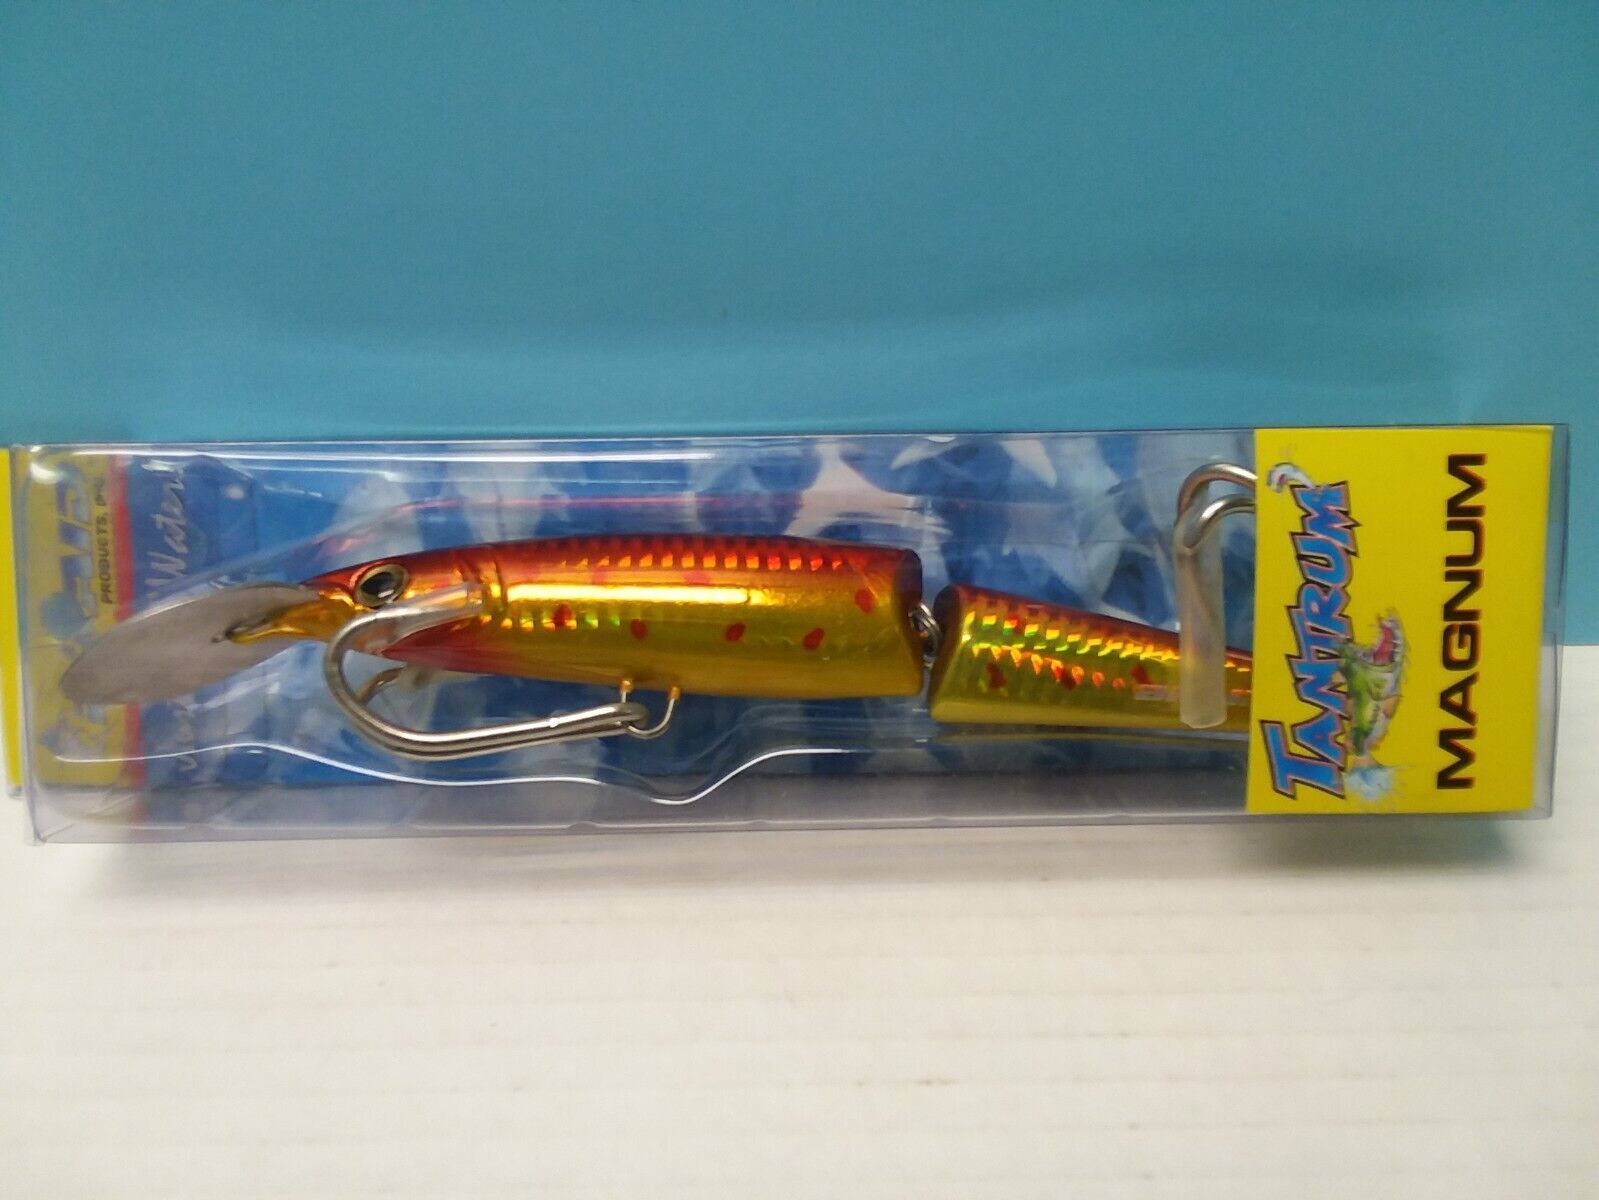 Braid Tantrum Magnum - Jointed Minnow bait - Flaming Trout - 407-33 - New in Box